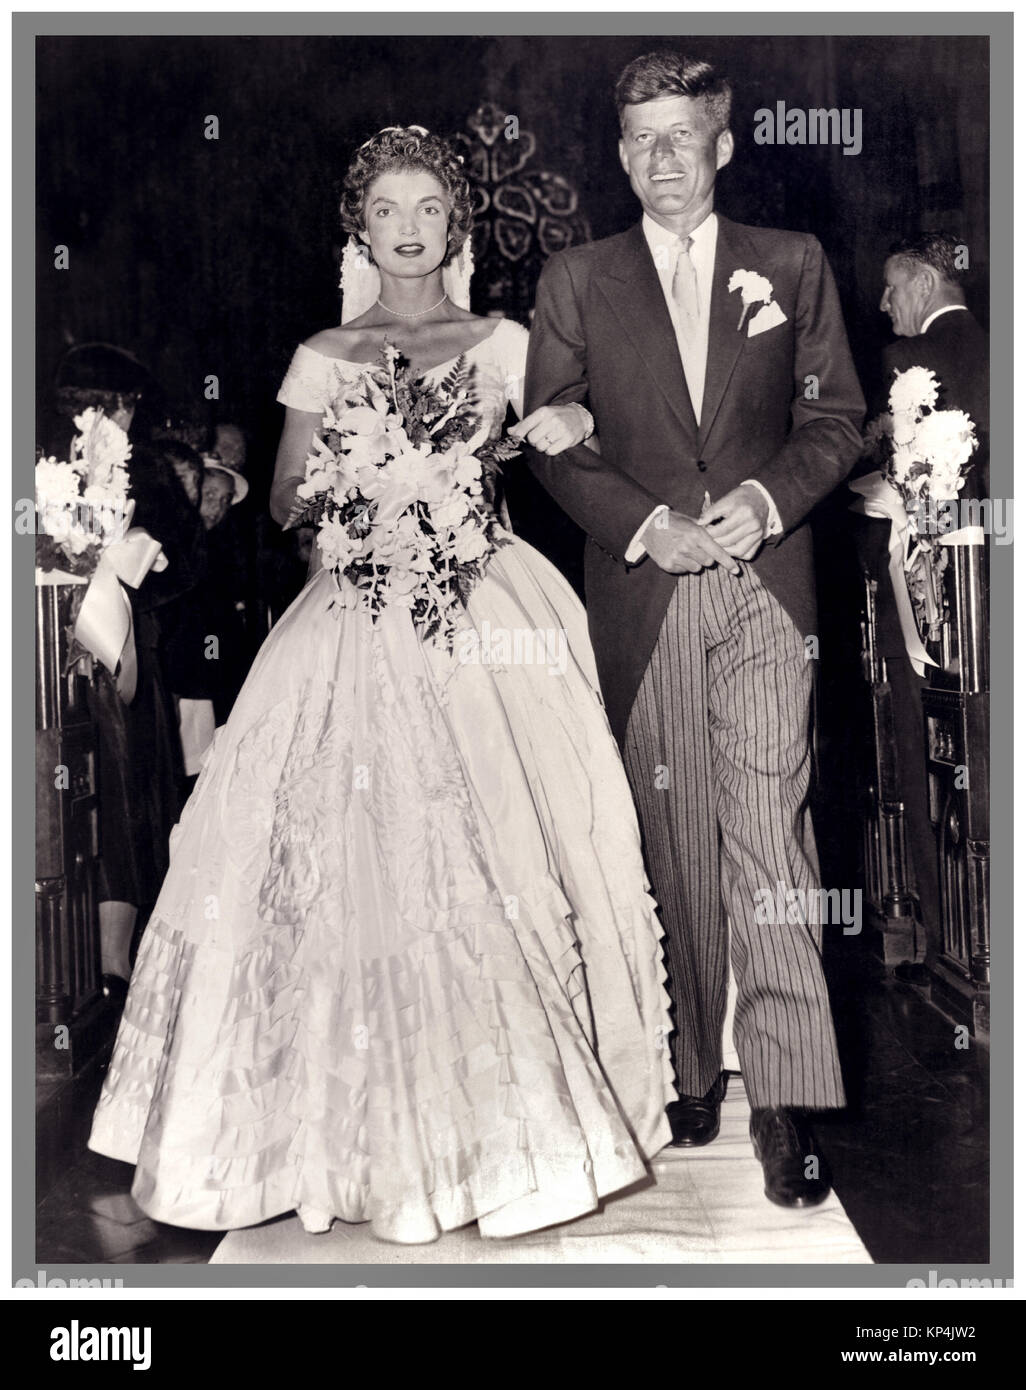 JFK KENNEDY WEDDING 1953 Vintage B&W  image of the Jackie Kennedy marriage to J.F Kennedy in 1953 Sept 12th.St. Mary’s Church Newport in a dress made by New York dressmaker Ann Lowe. Stock Photo